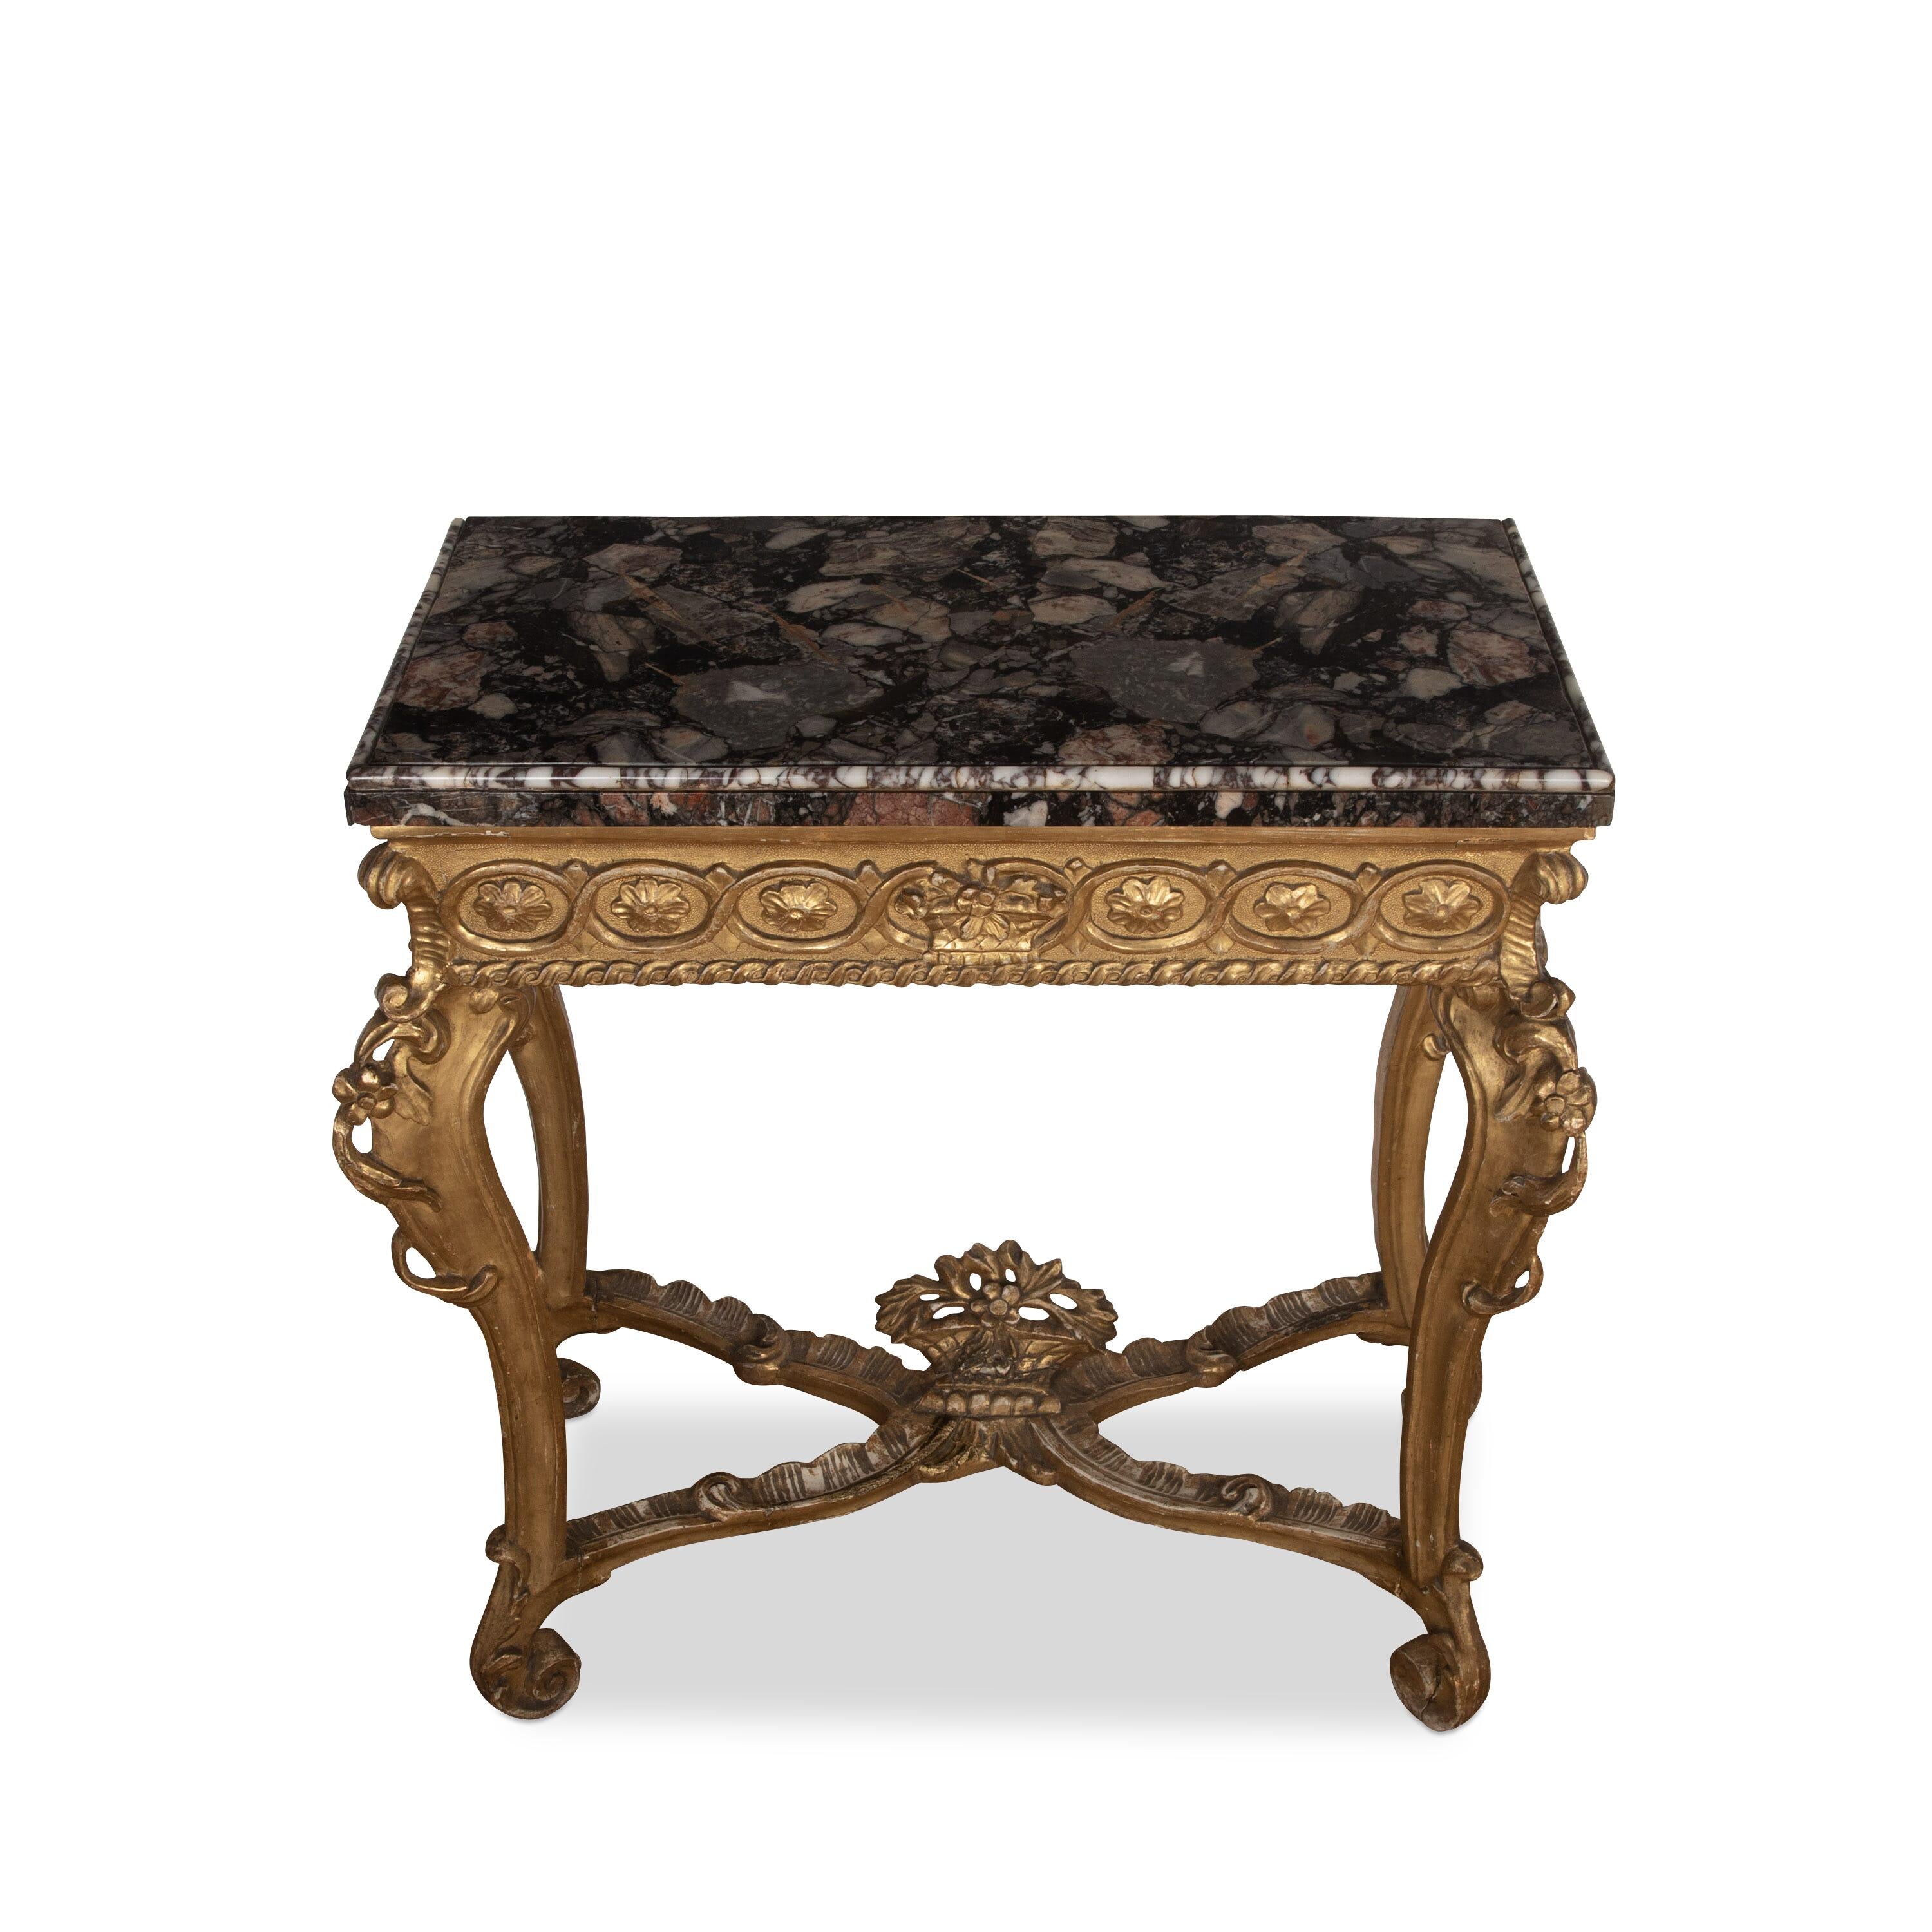 Rococo C18th Giltwood & Marble Top Pier Table For Sale